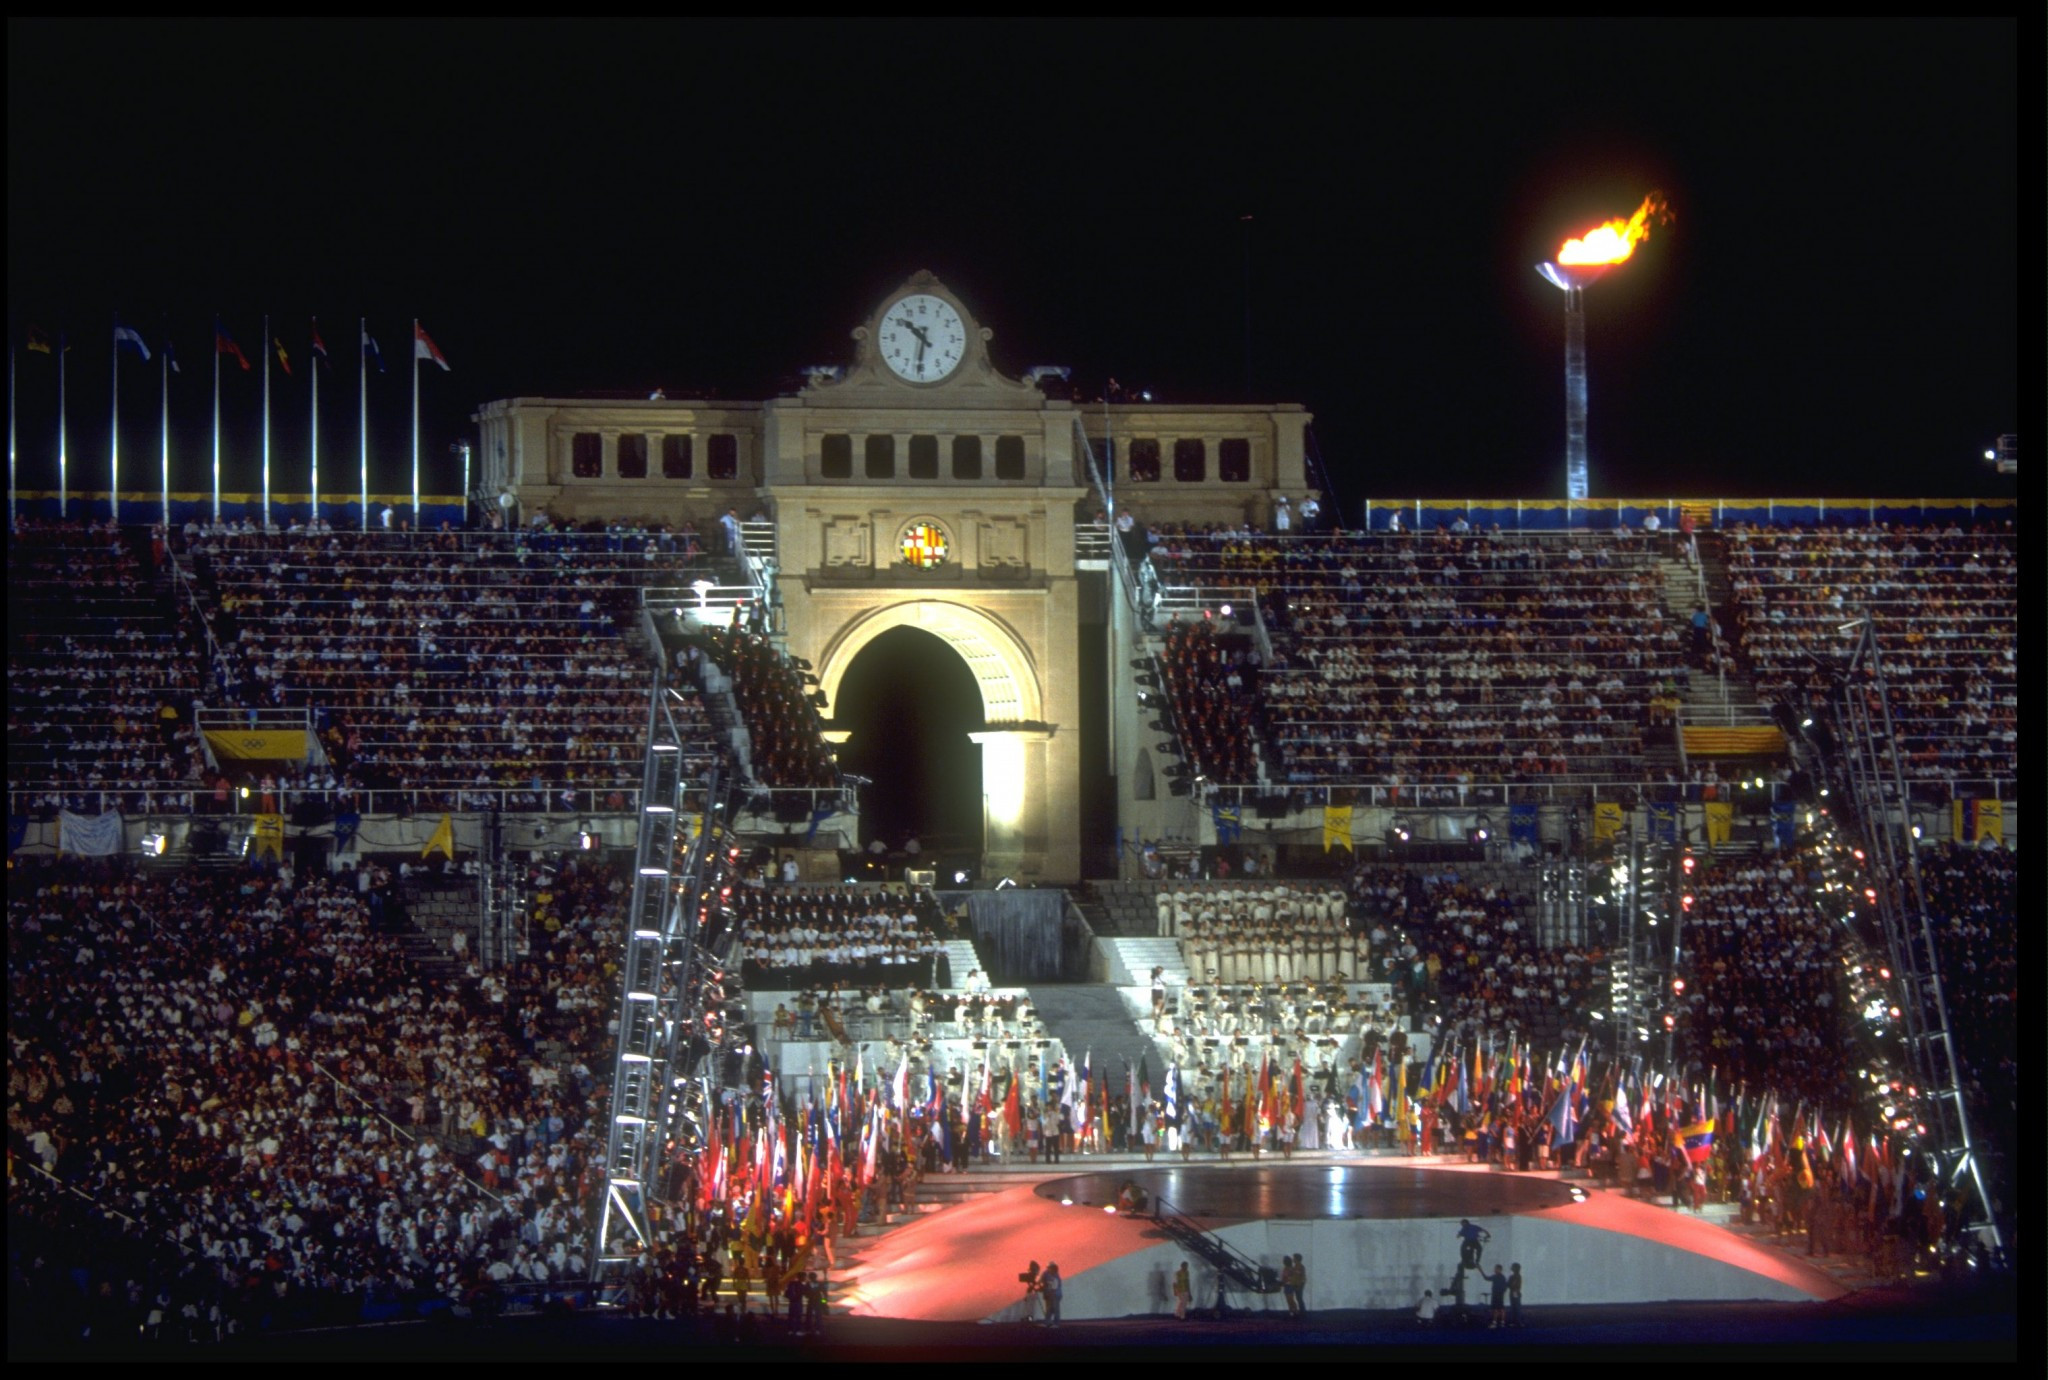 Estonia won two medals at the Barcelona 1992 Olympic Games, including one gold ©Getty Images